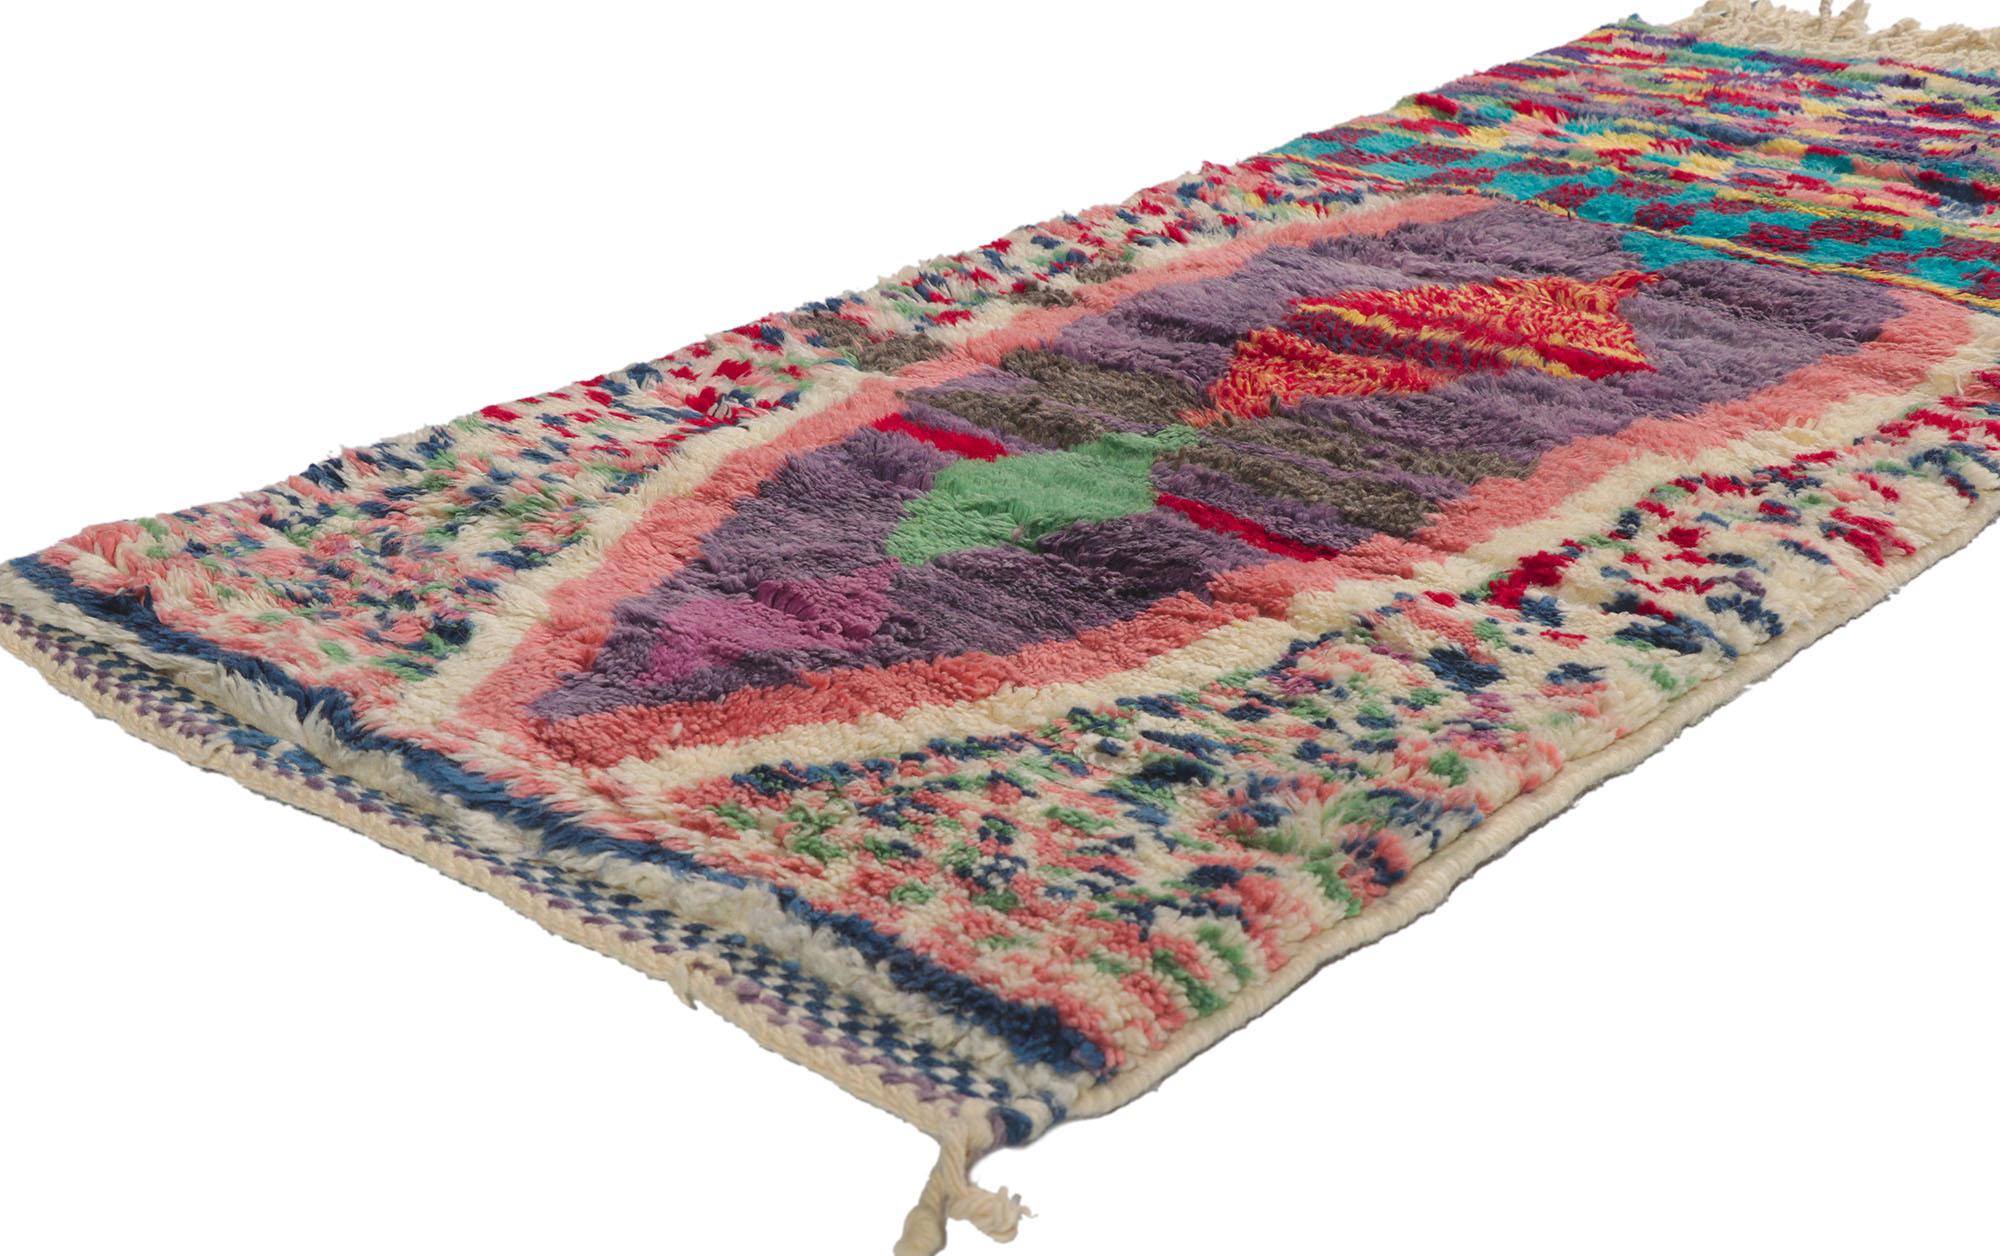 ?21131 New Colorful Berber Moroccan rug 02'06 x 05'09. Showcasing an expressive design, incredible detail and texture, this hand knotted wool Berber Moroccan rug is a captivating vision of woven beauty. The bold geometric pattern and vibrant colors